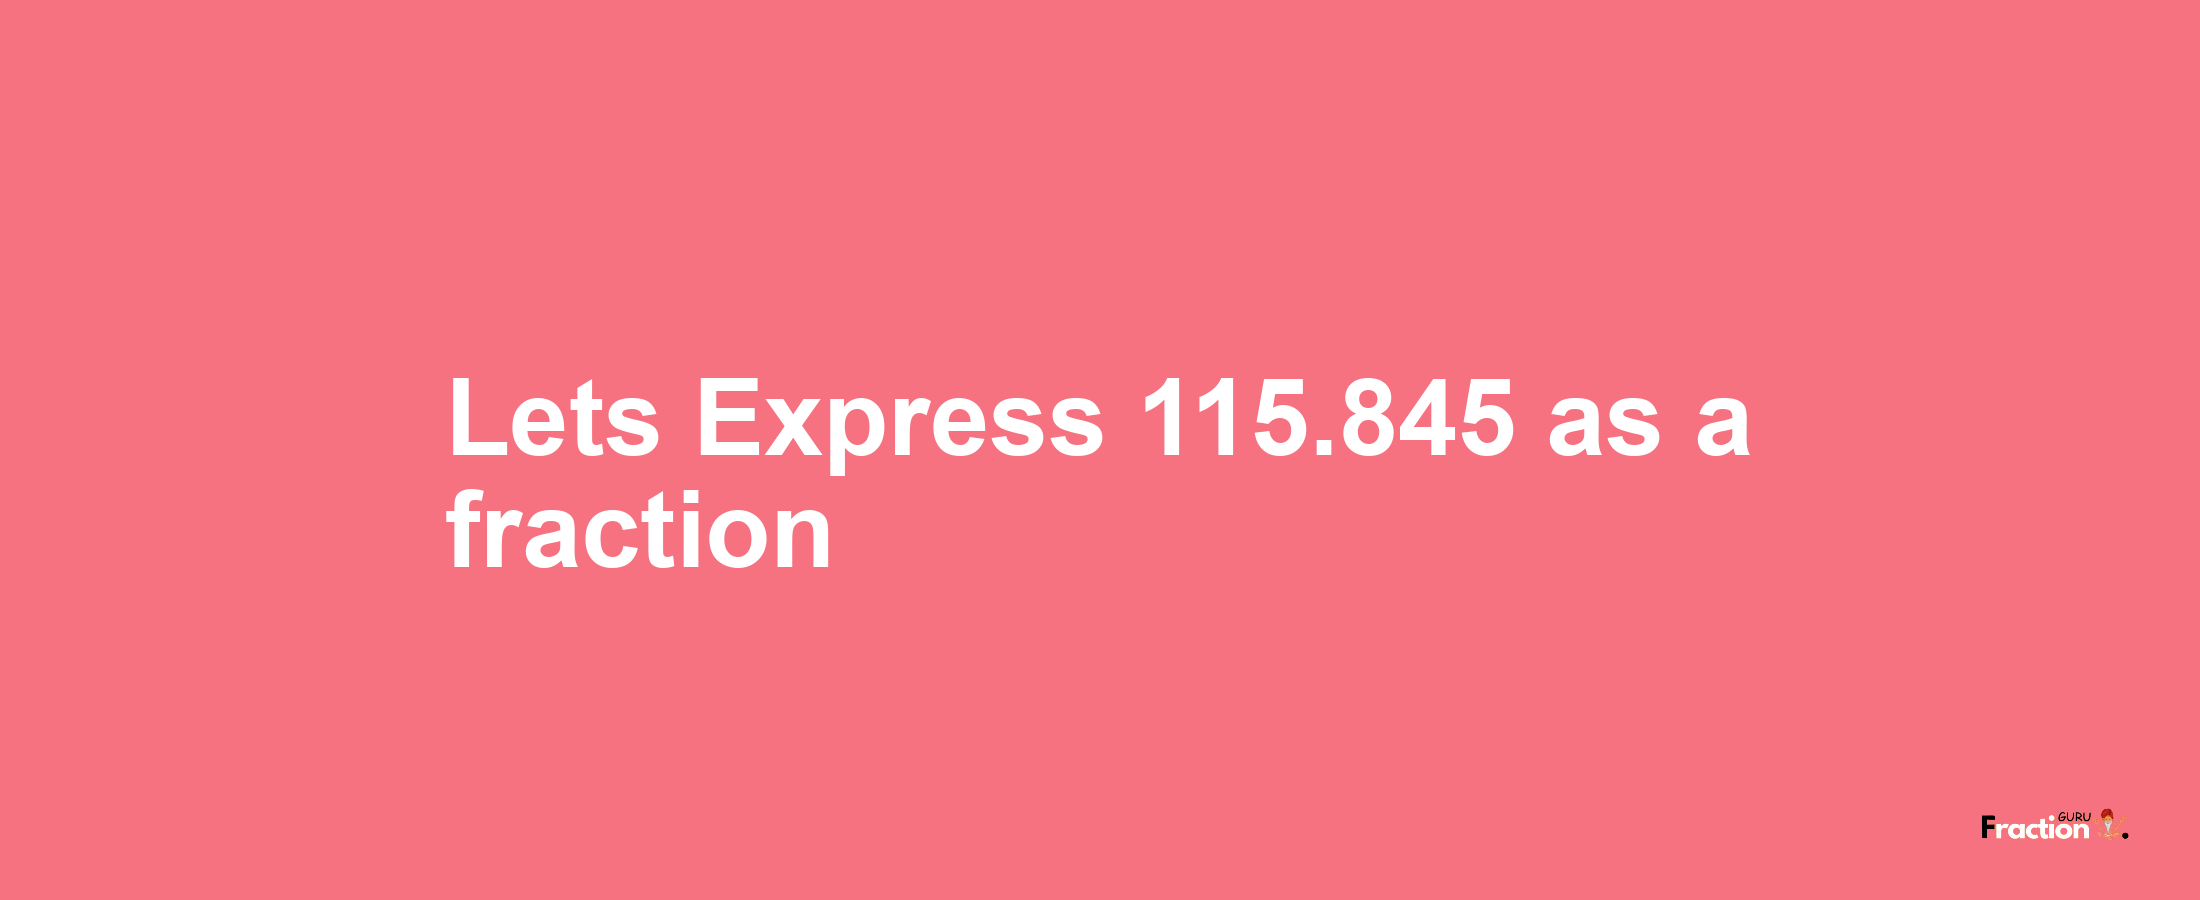 Lets Express 115.845 as afraction